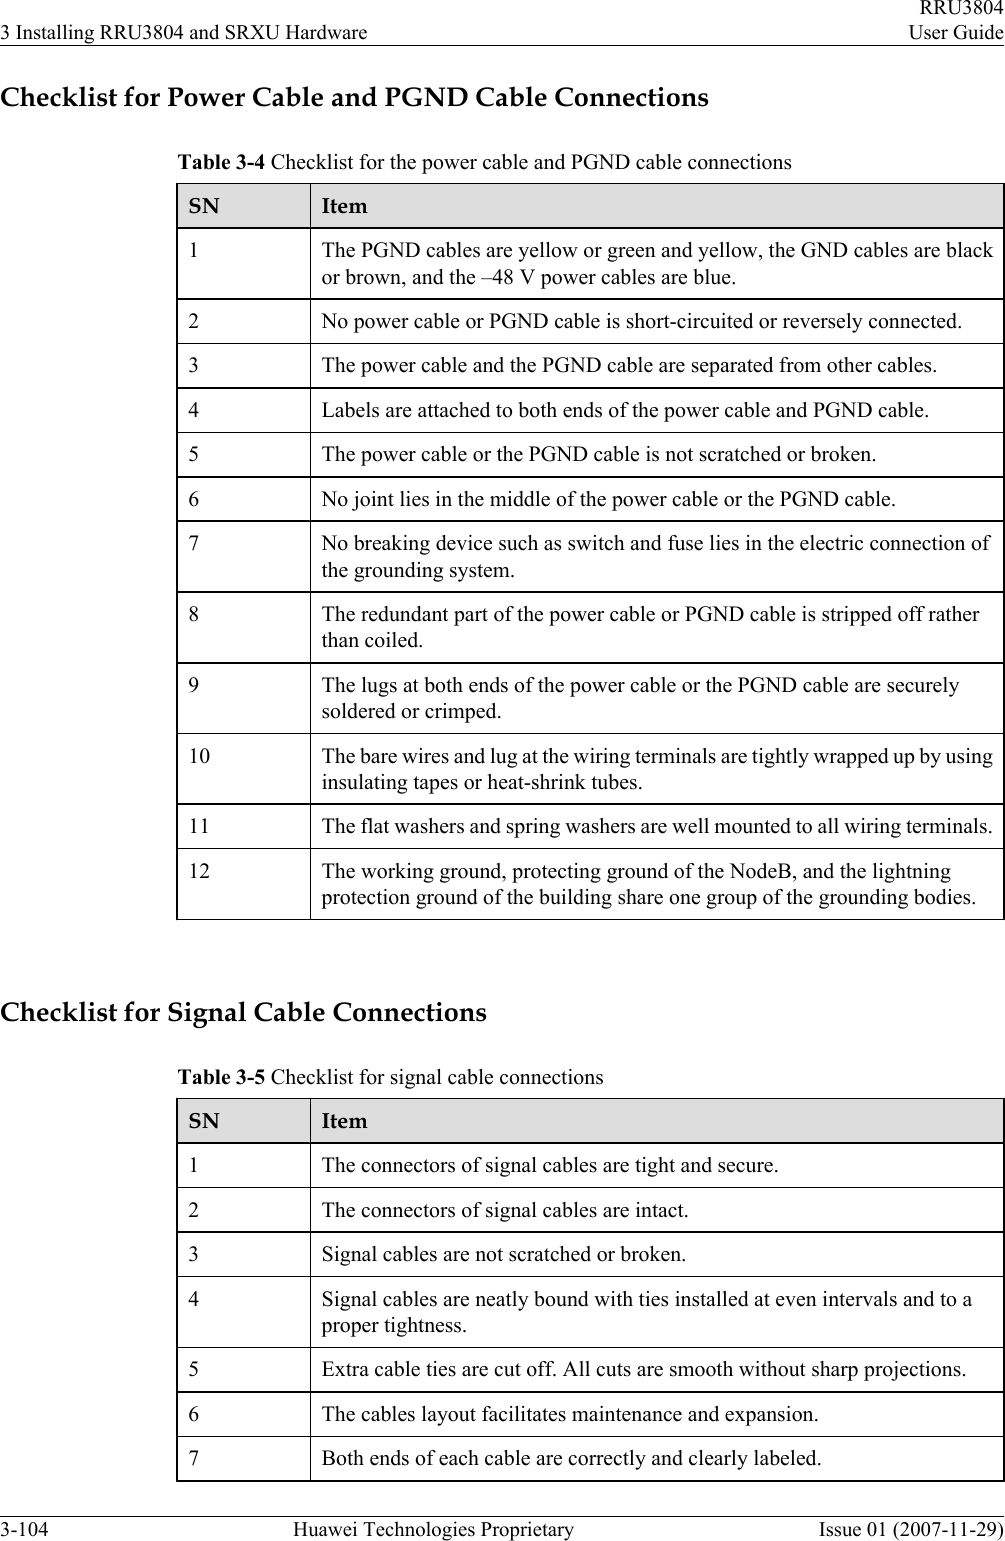 Checklist for Power Cable and PGND Cable ConnectionsTable 3-4 Checklist for the power cable and PGND cable connectionsSN Item1The PGND cables are yellow or green and yellow, the GND cables are blackor brown, and the –48 V power cables are blue.2 No power cable or PGND cable is short-circuited or reversely connected.3 The power cable and the PGND cable are separated from other cables.4 Labels are attached to both ends of the power cable and PGND cable.5 The power cable or the PGND cable is not scratched or broken.6 No joint lies in the middle of the power cable or the PGND cable.7 No breaking device such as switch and fuse lies in the electric connection ofthe grounding system.8 The redundant part of the power cable or PGND cable is stripped off ratherthan coiled.9 The lugs at both ends of the power cable or the PGND cable are securelysoldered or crimped.10 The bare wires and lug at the wiring terminals are tightly wrapped up by usinginsulating tapes or heat-shrink tubes.11 The flat washers and spring washers are well mounted to all wiring terminals.12 The working ground, protecting ground of the NodeB, and the lightningprotection ground of the building share one group of the grounding bodies. Checklist for Signal Cable ConnectionsTable 3-5 Checklist for signal cable connectionsSN Item1The connectors of signal cables are tight and secure.2 The connectors of signal cables are intact.3 Signal cables are not scratched or broken.4 Signal cables are neatly bound with ties installed at even intervals and to aproper tightness.5 Extra cable ties are cut off. All cuts are smooth without sharp projections.6 The cables layout facilitates maintenance and expansion.7 Both ends of each cable are correctly and clearly labeled.3 Installing RRU3804 and SRXU HardwareRRU3804User Guide3-104 Huawei Technologies Proprietary Issue 01 (2007-11-29)